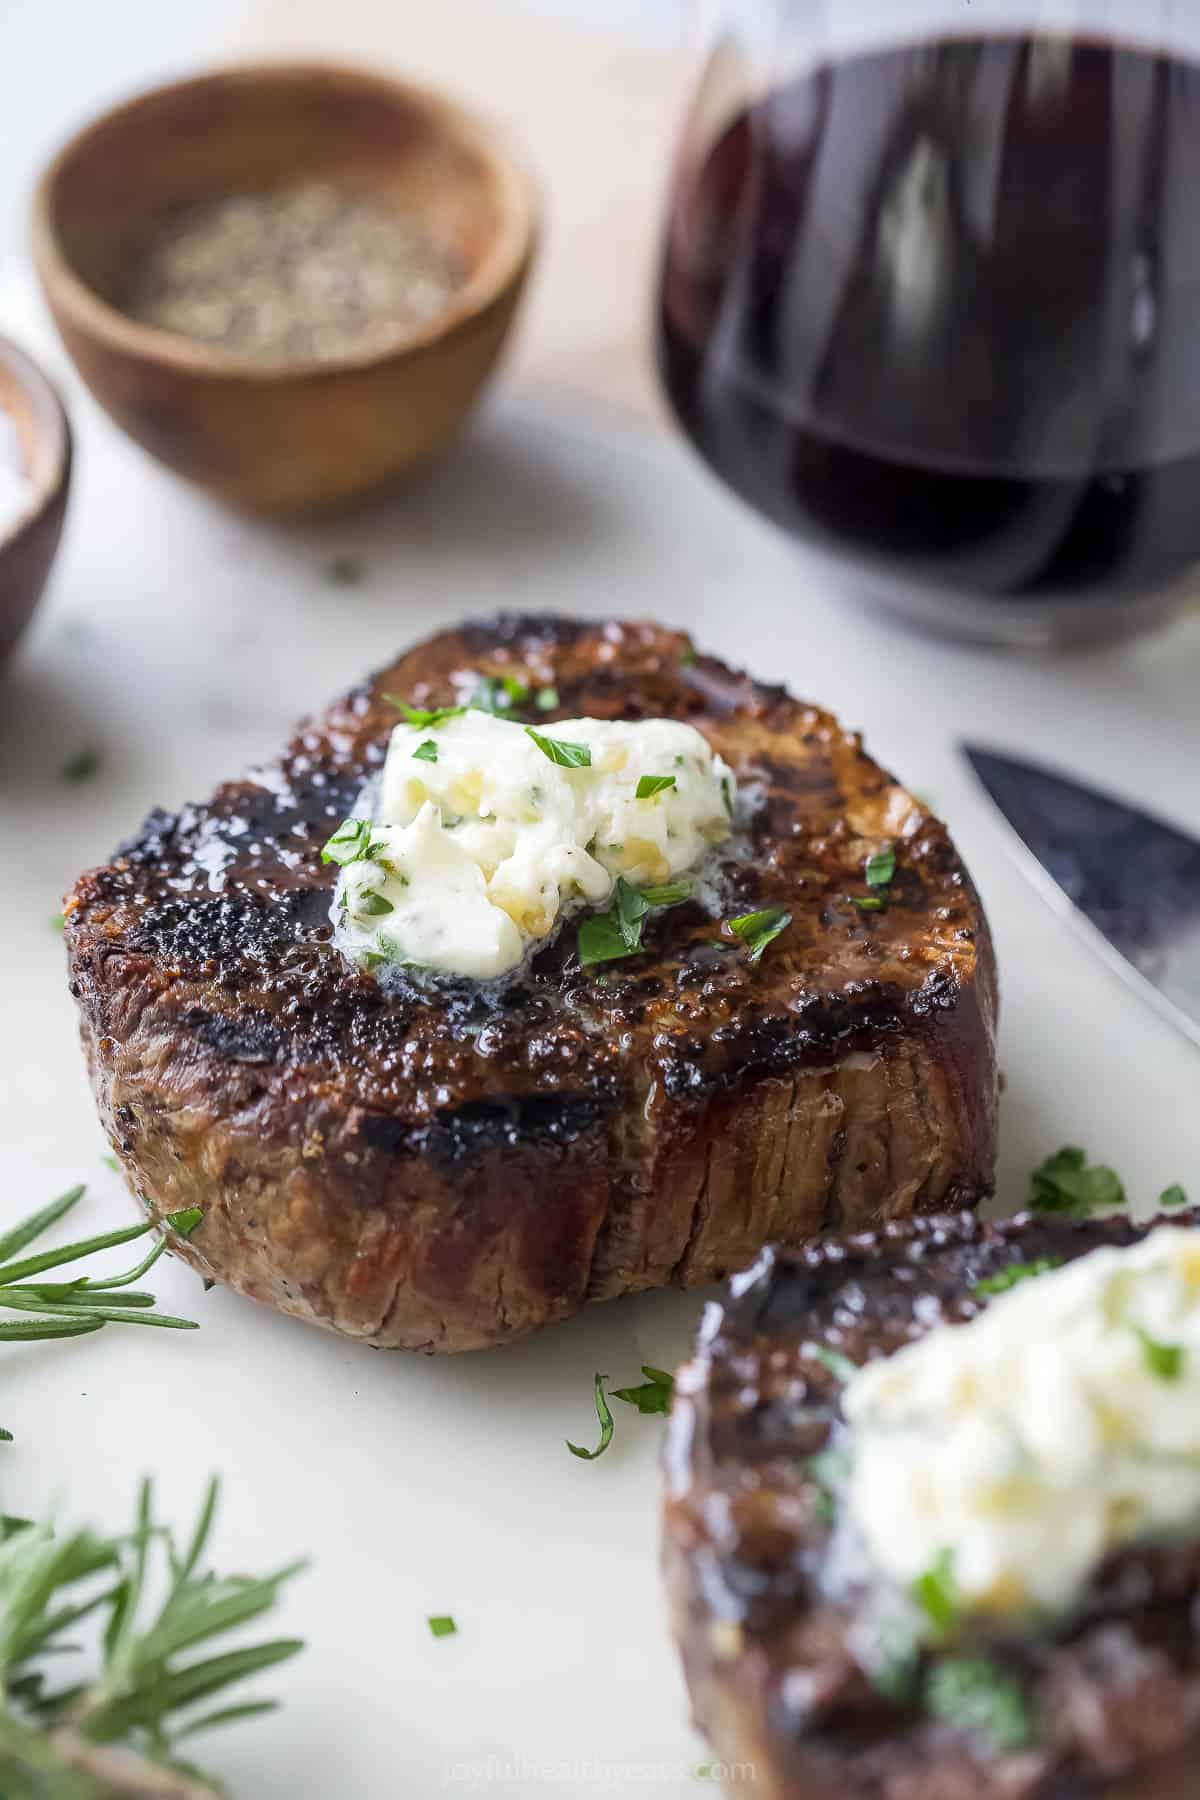 Grilled filet mignon with a ، of ،er on top.